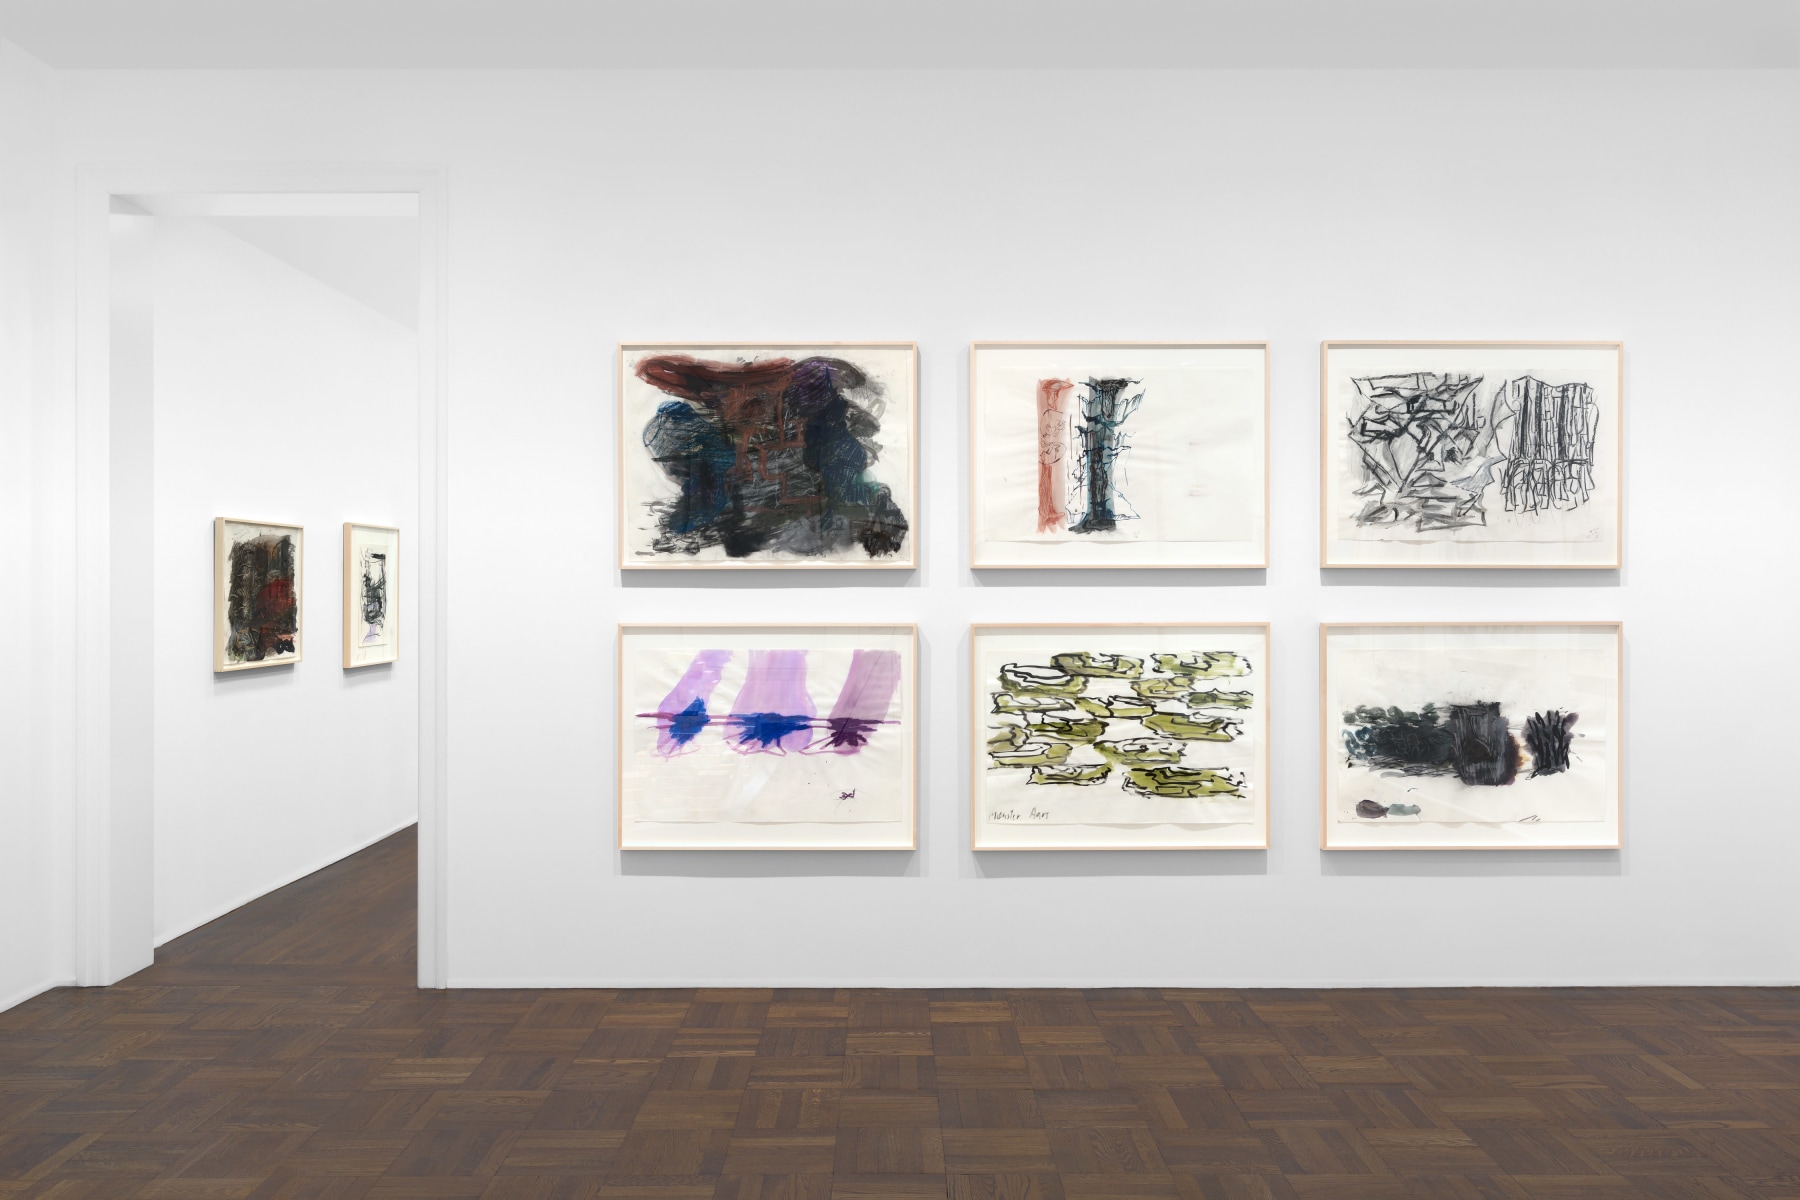 PER KIRKEBY Works on Paper, Works in Brick 20 November 2019 through 25 January 2020 UPPER EAST SIDE, NEW YORK, Installation View 1